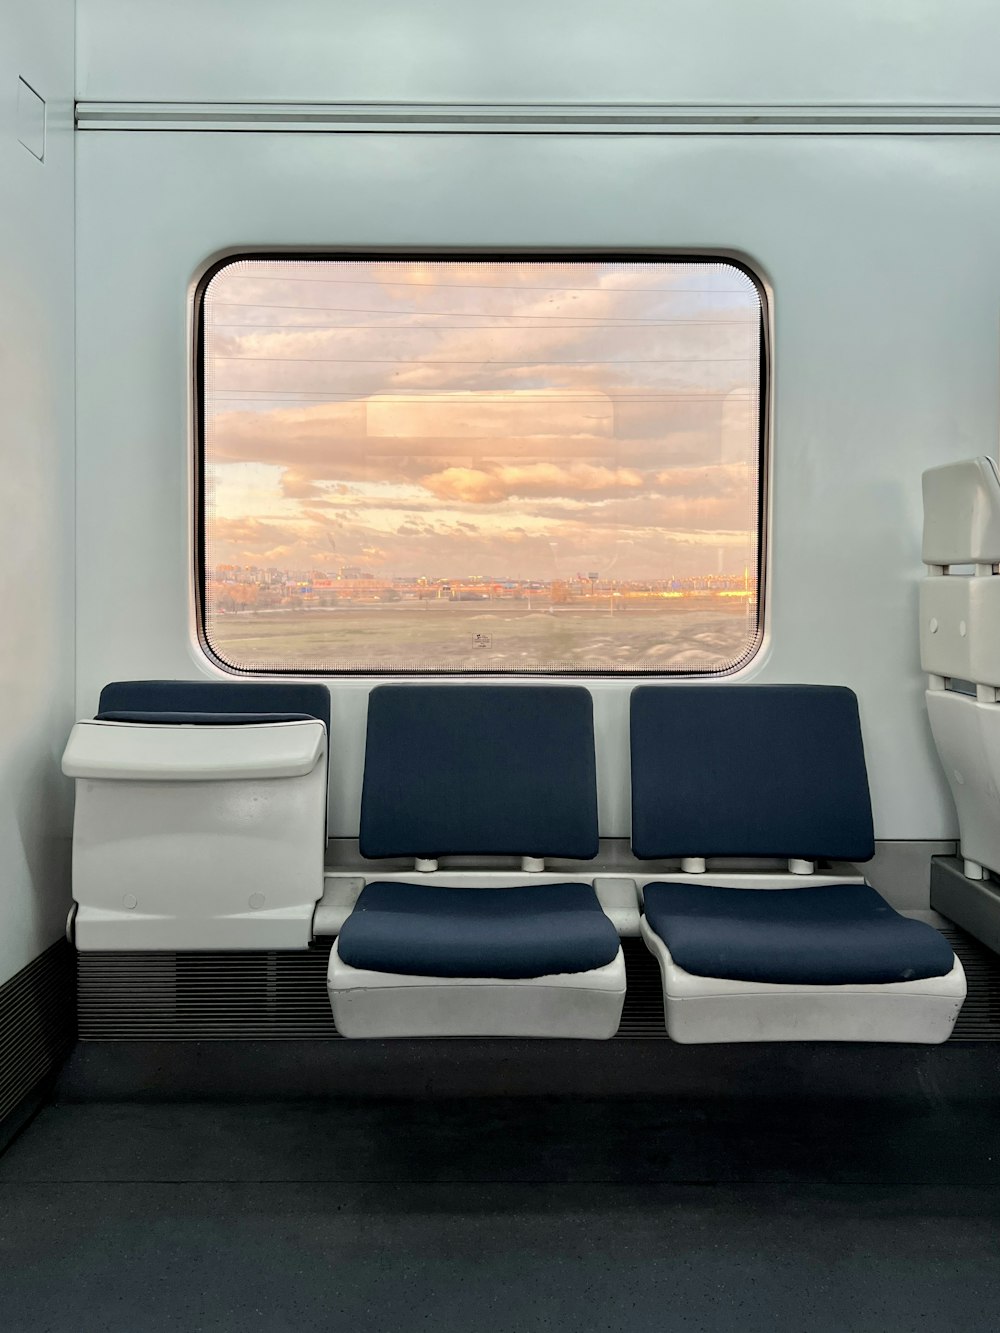 a seat on a train with a view of the sky